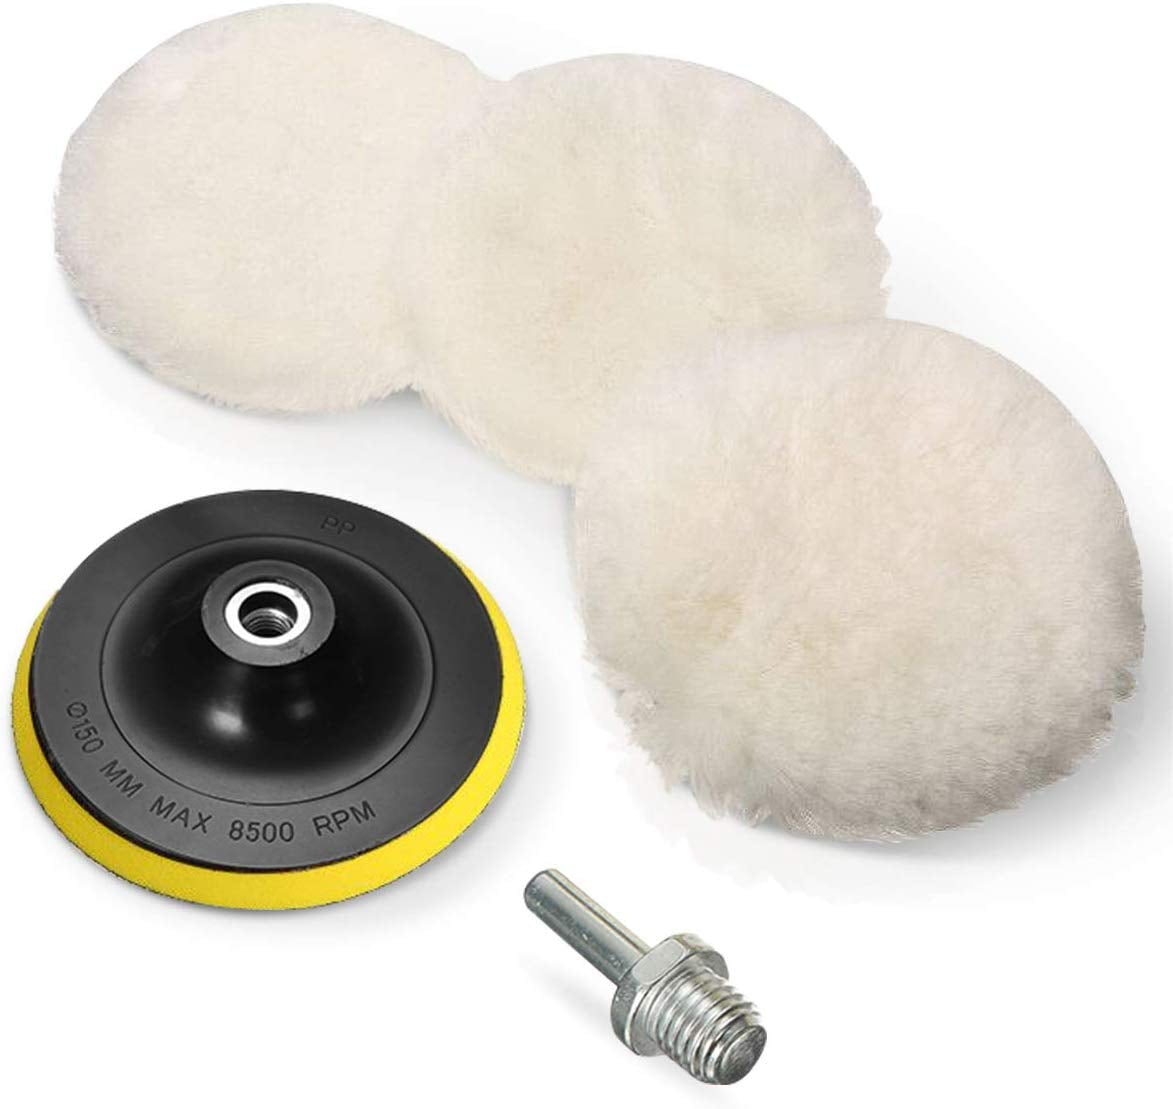 5 Polishing Waxing Wool Buffer Pads Hook and Loop Backing Pad with M14 Drill Adapter for Car & Boat Polishing Waxing Cutting Set of 8 Buffing Wool Pads Kit 2 Woolen Polishing Pads 